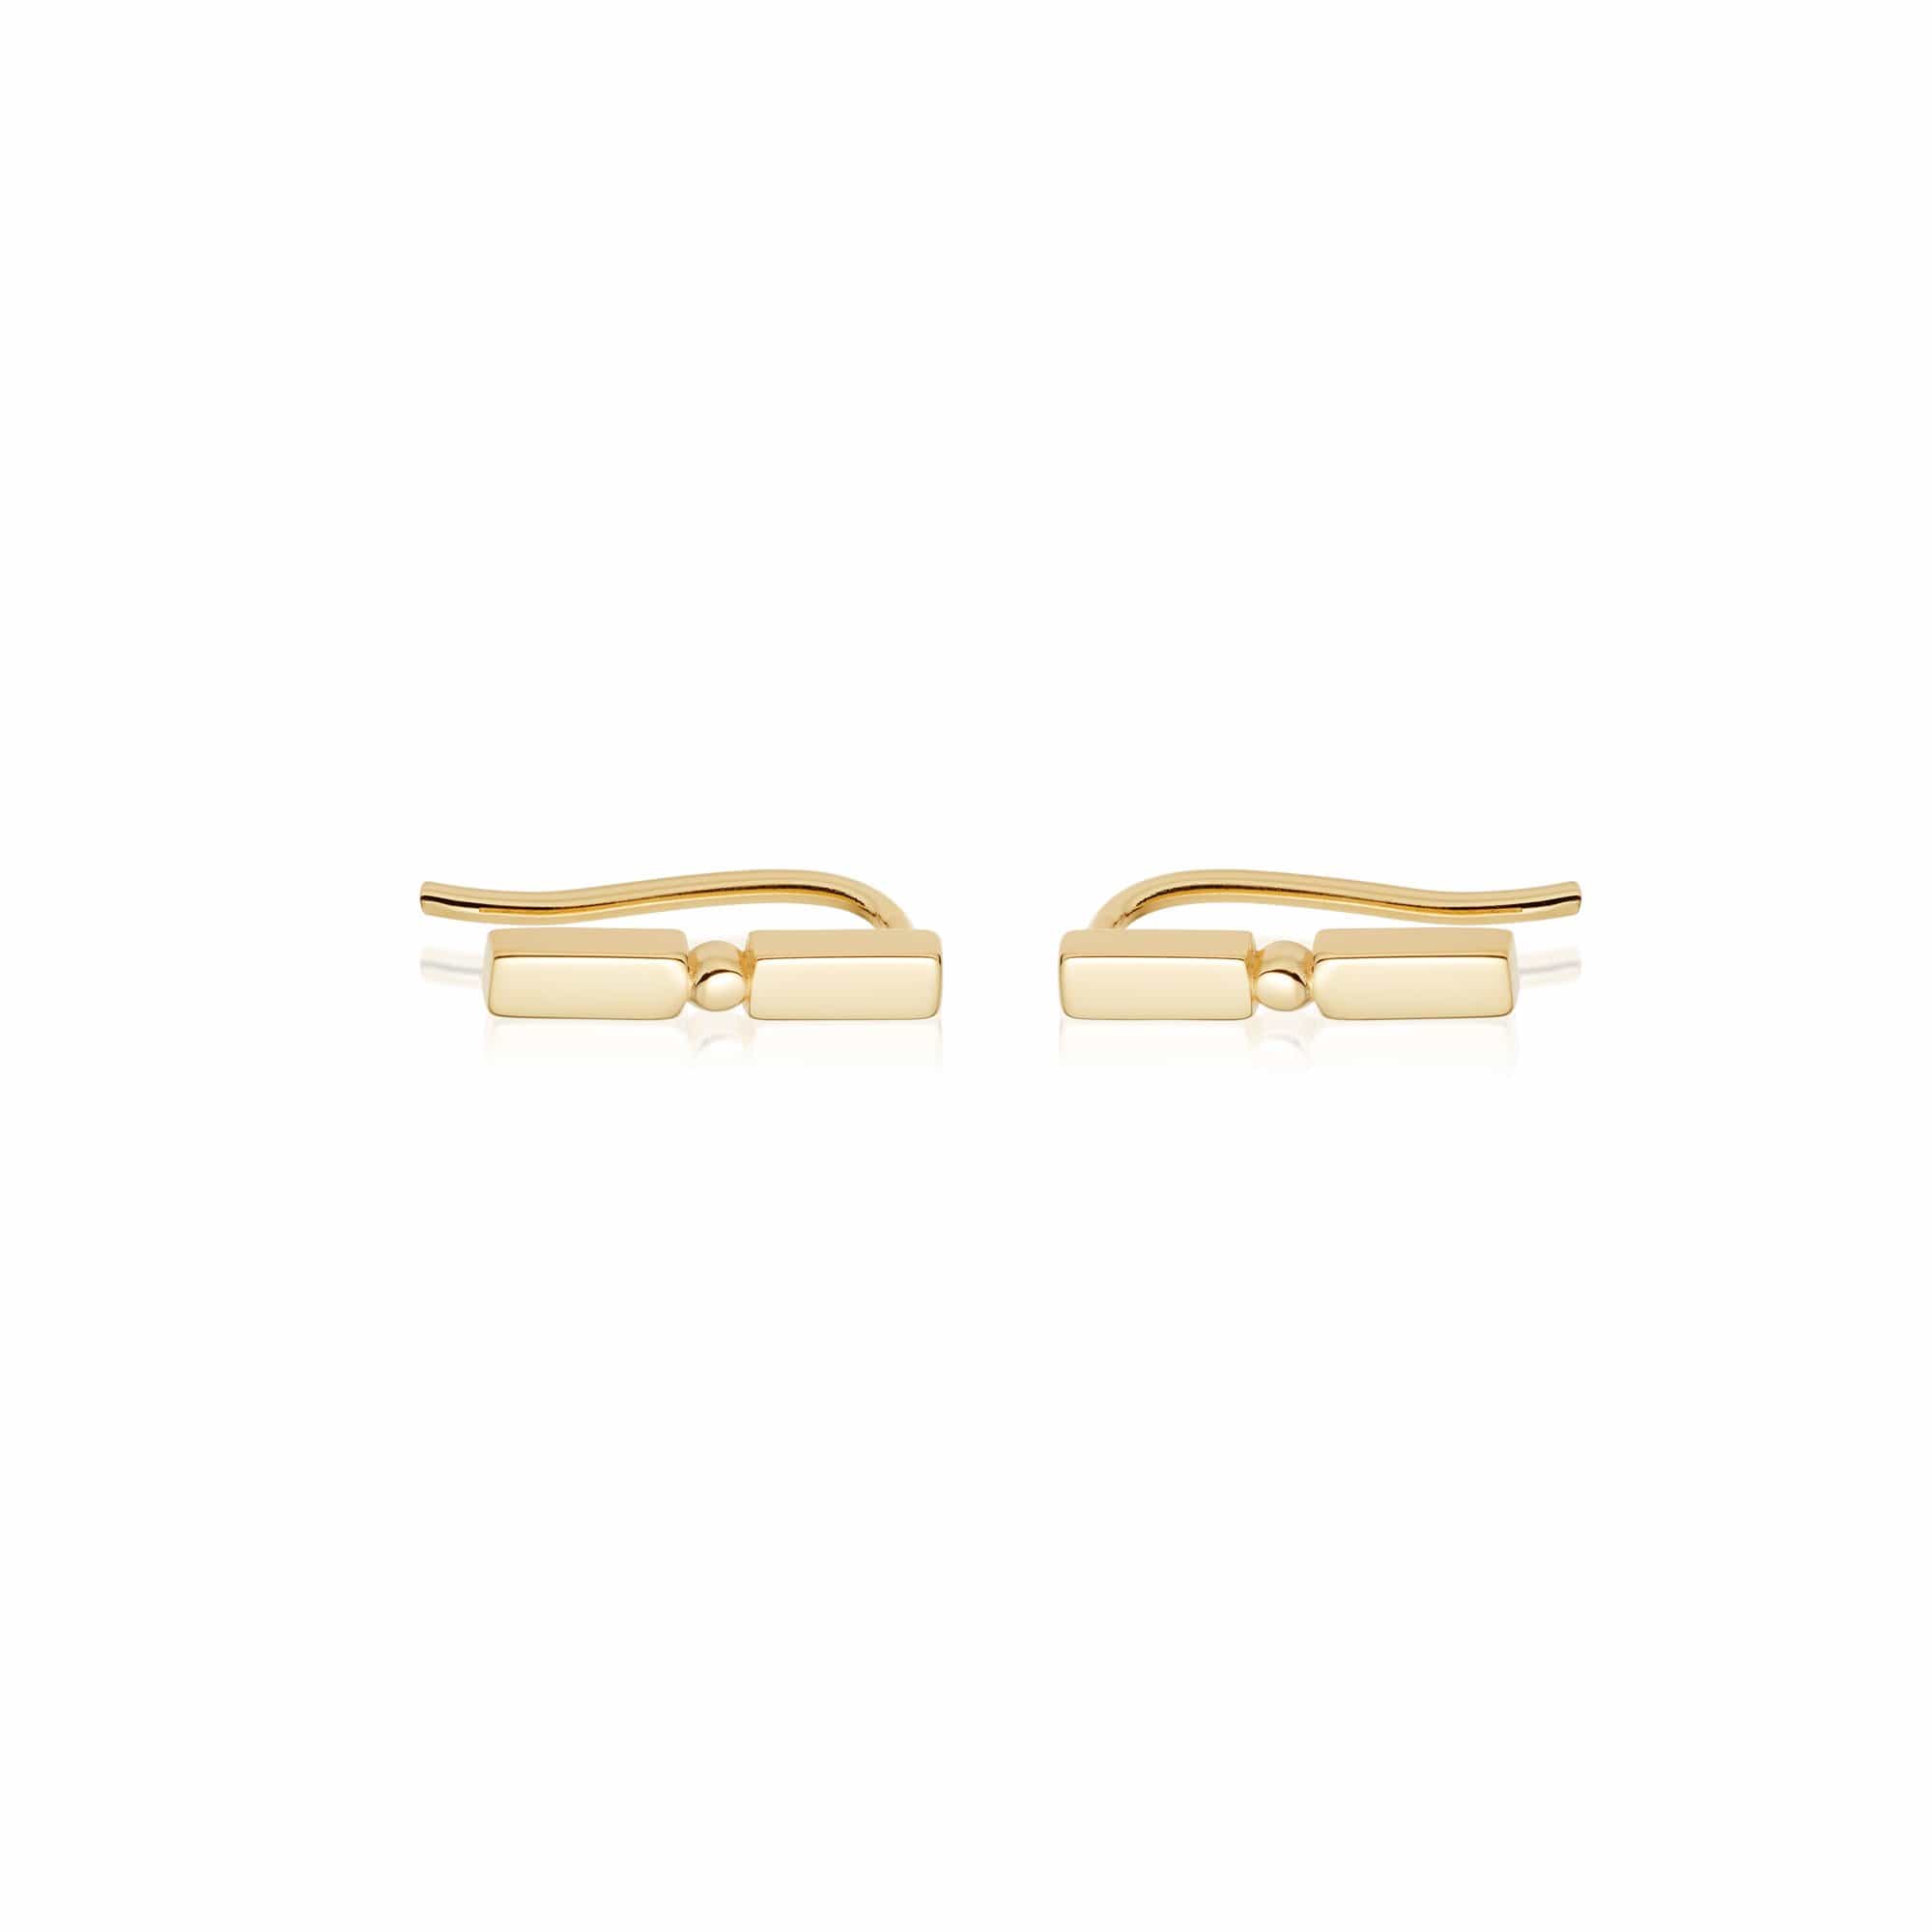 STACKED CRAWLER EARRINGS - 18CT GOLD PLATE